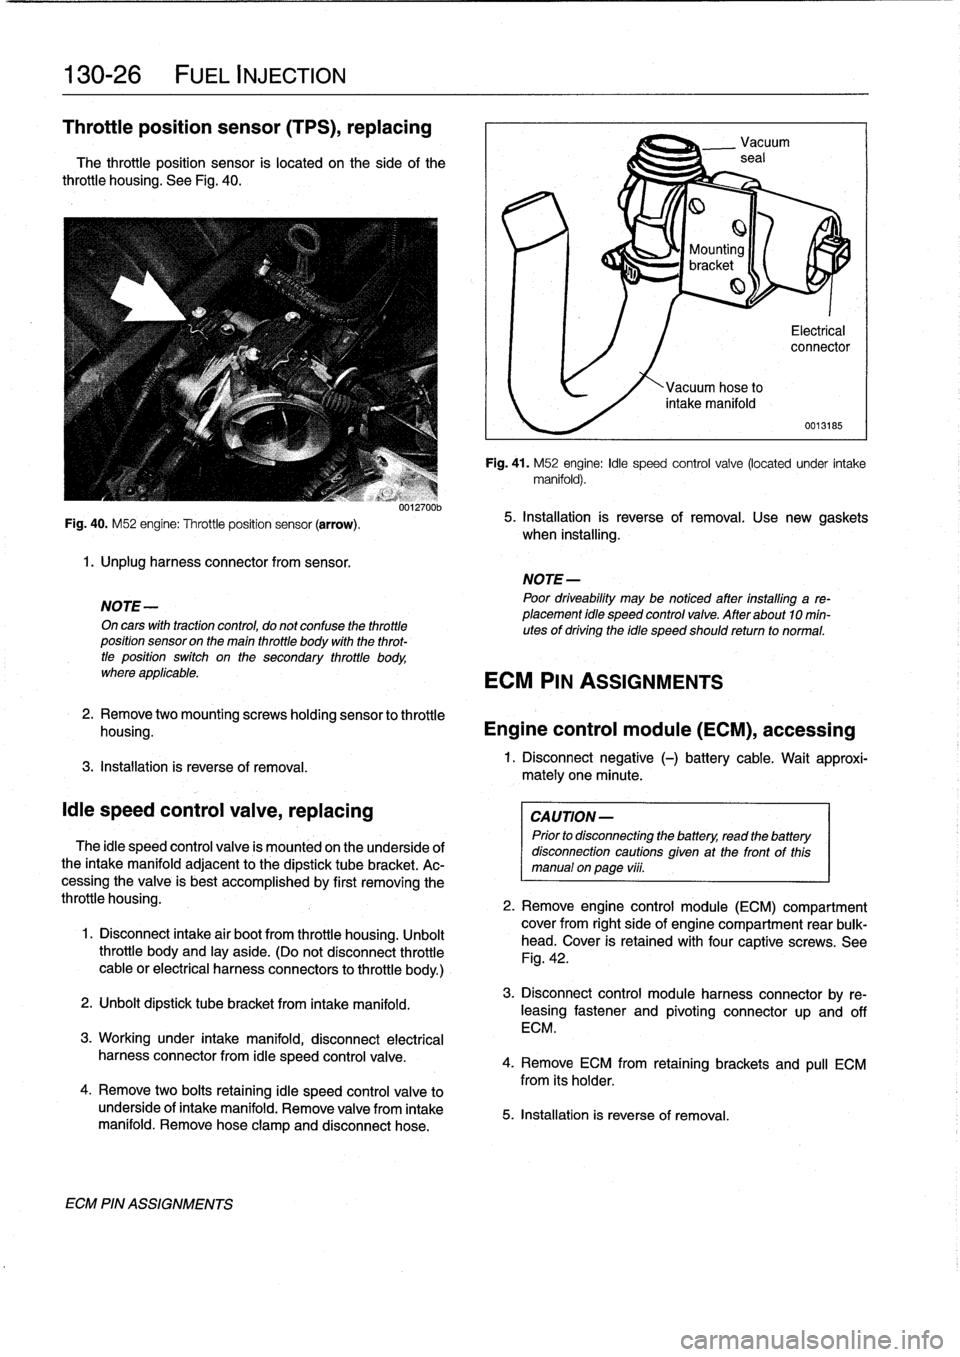 BMW 328i 1994 E36 Workshop Manual 
130-26

	

FUEL
INJECTION

Throttle
position
sensor
(TPS),
replacing

The
throttie
position
sensor
is
located
on
the
side
of
the
throttie
housing
.
See
Fig
.
40
.

Fig
.
40
.
M52
engine
:
Throttle
po